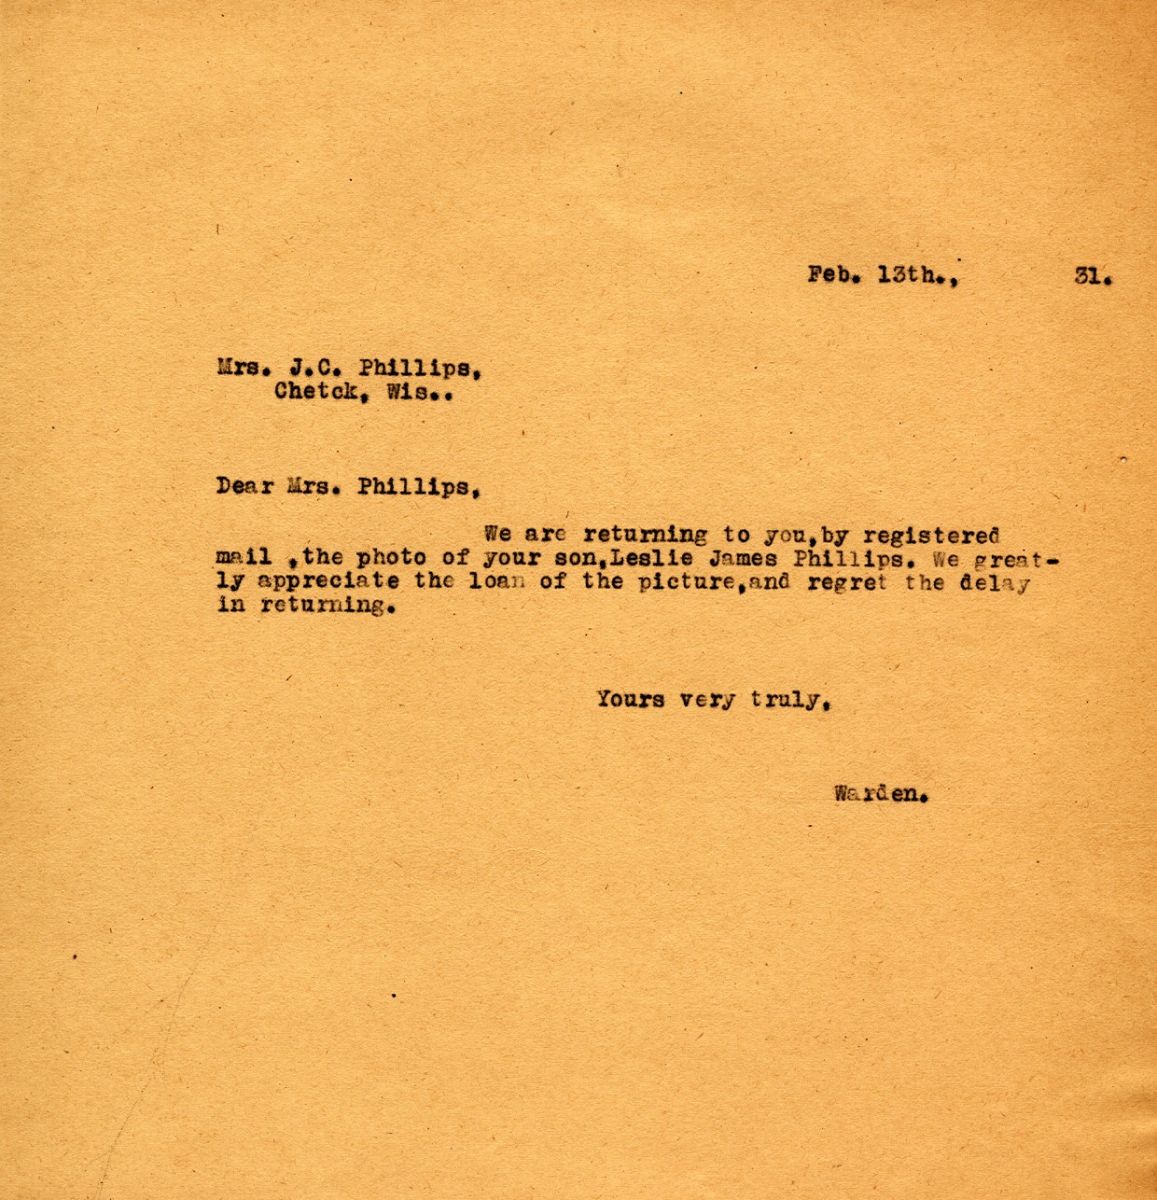 Letter from the Warden to Mrs. J.C. Phillips, 13th February 1931